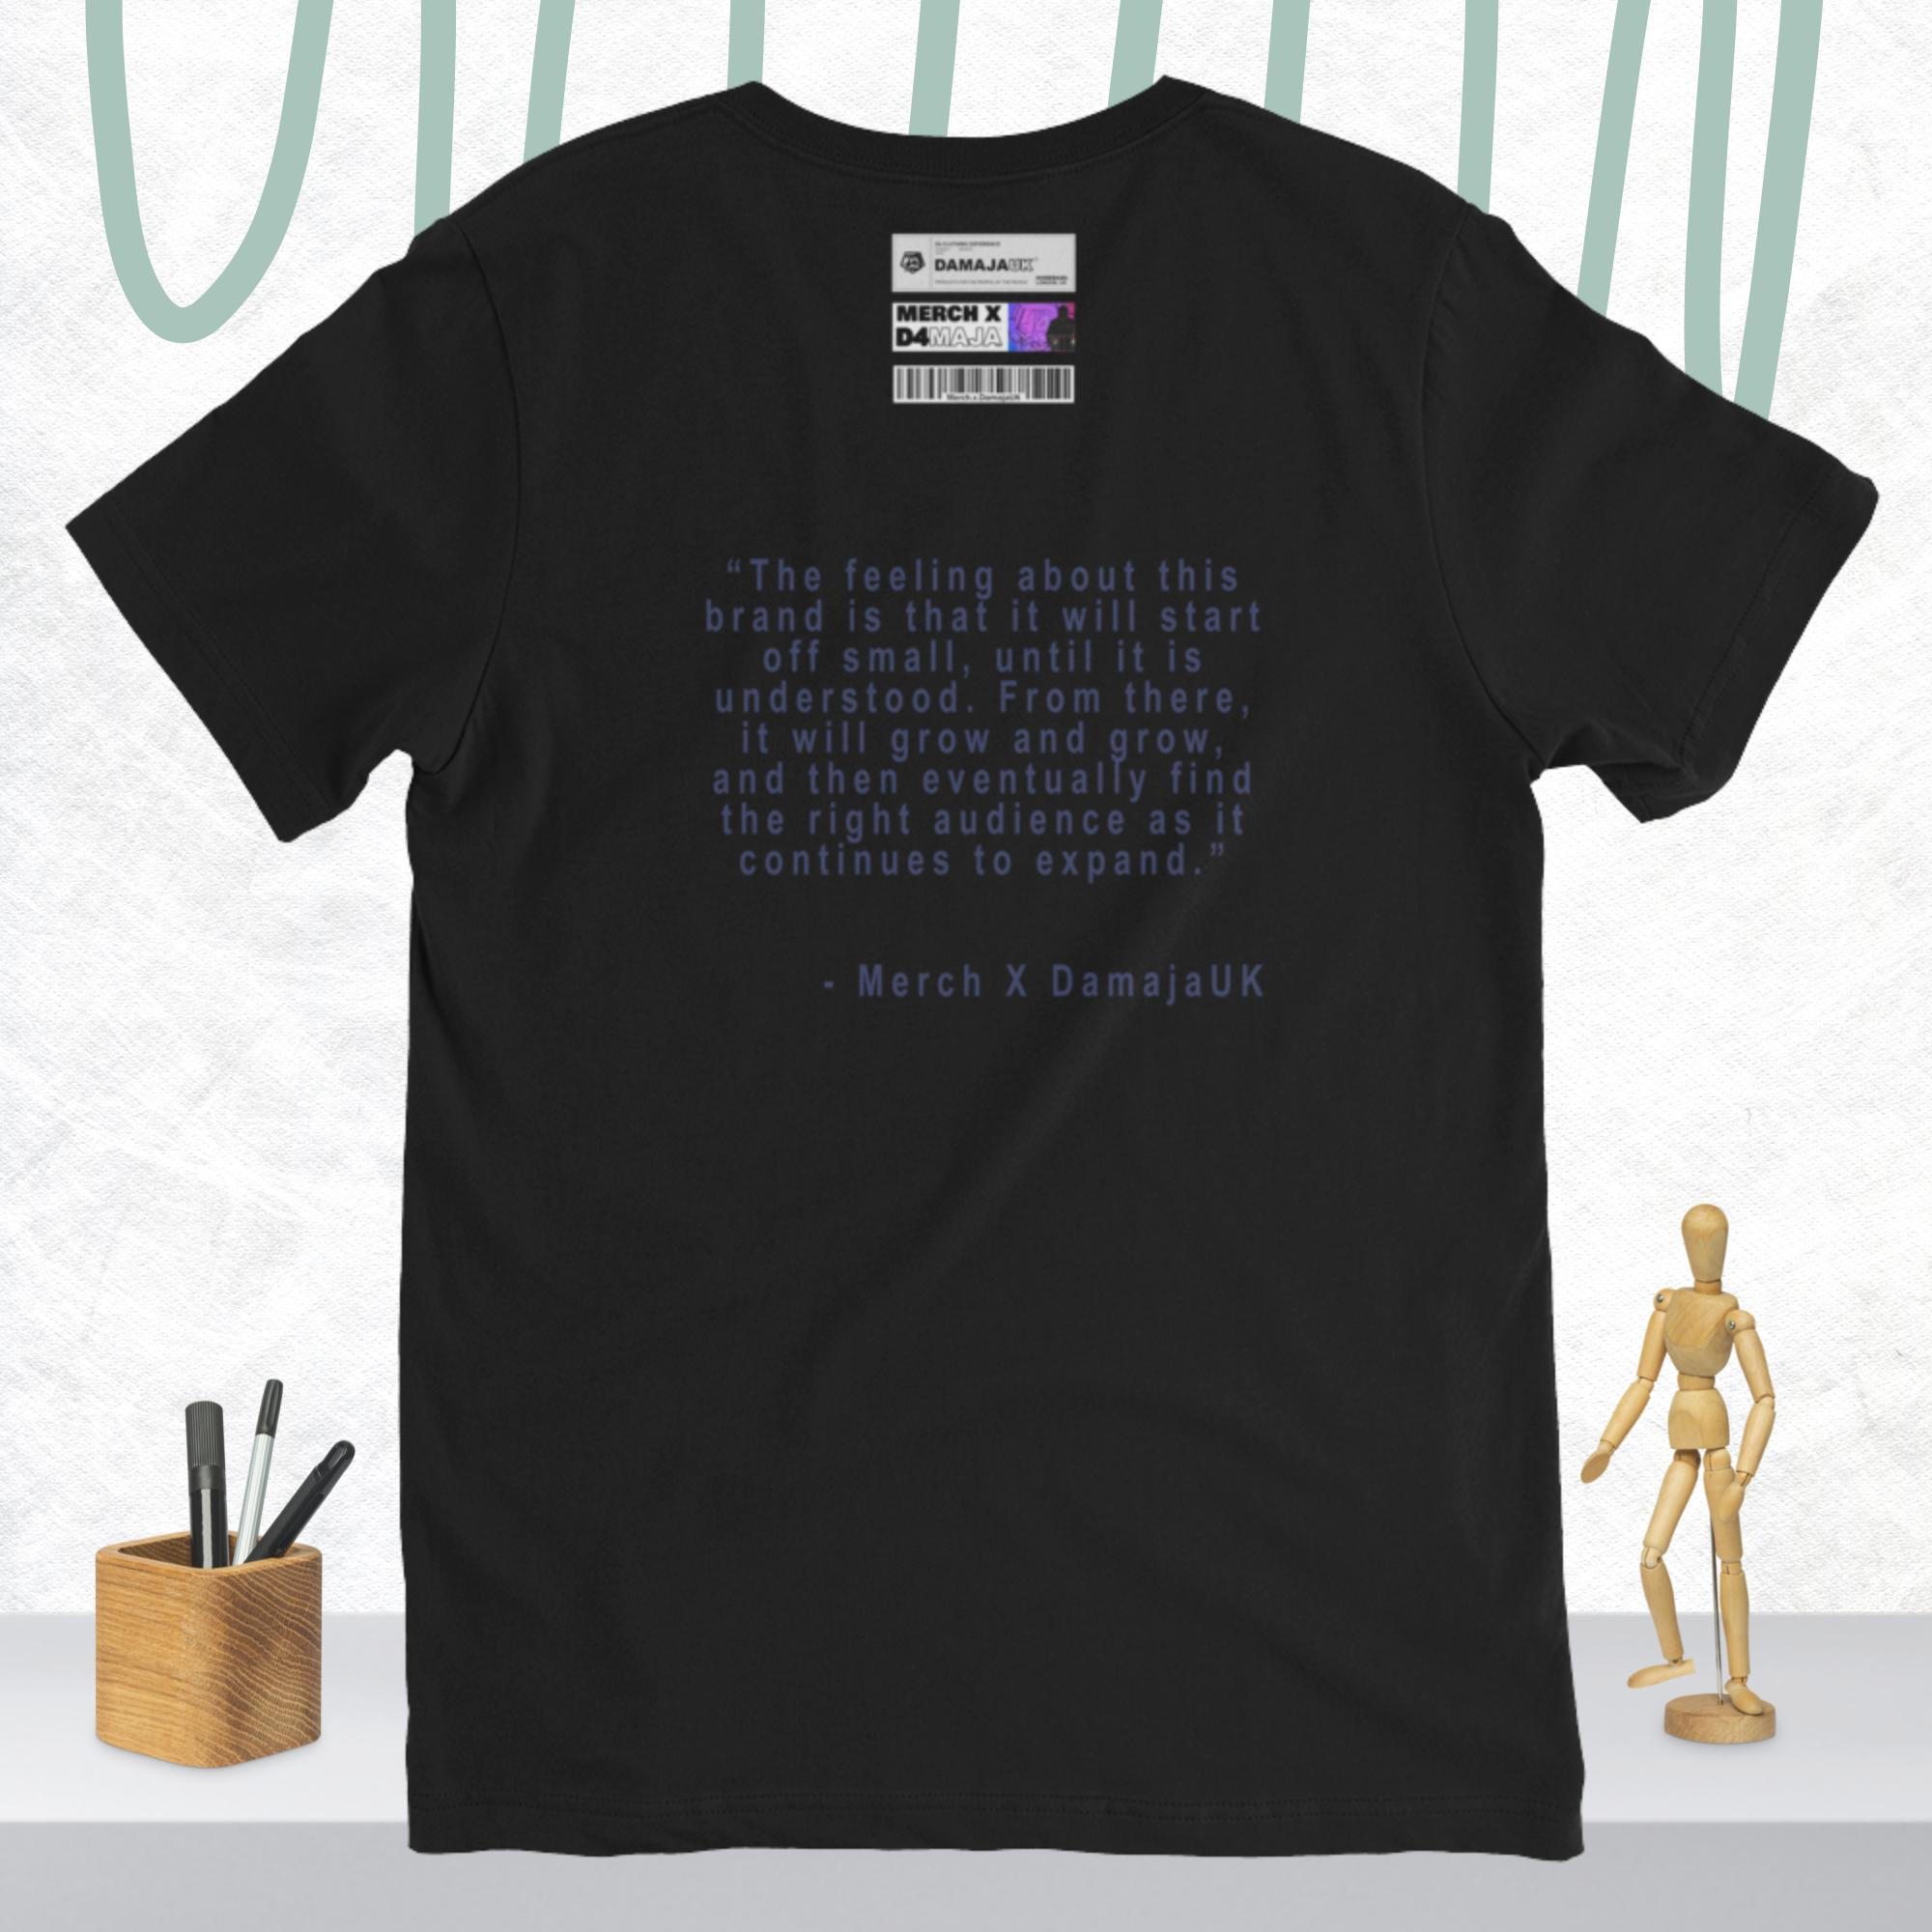 More Than Just The Music logo styled t-shirt